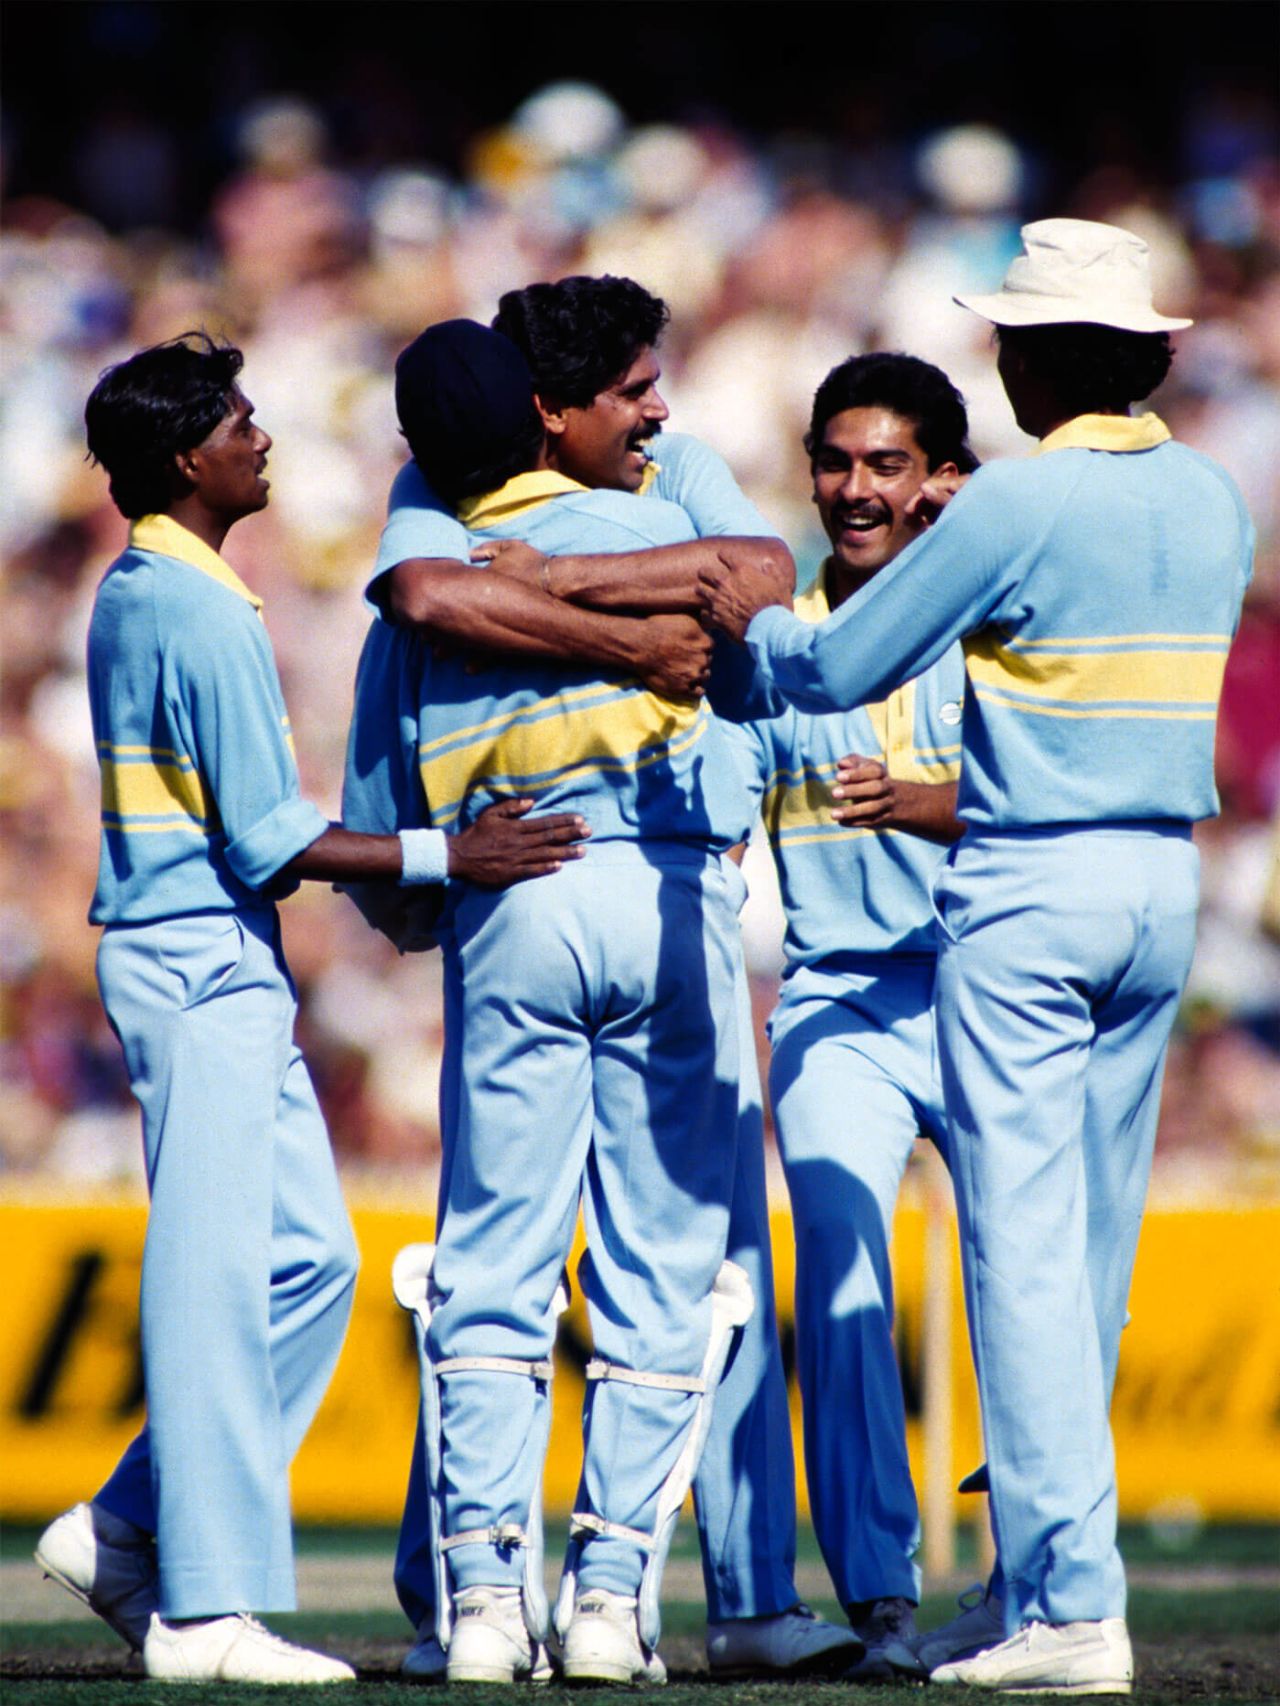 The Indians celebrate a wicket, India v Pakistan, World Championship of Cricket, MCG, February 20, 1985